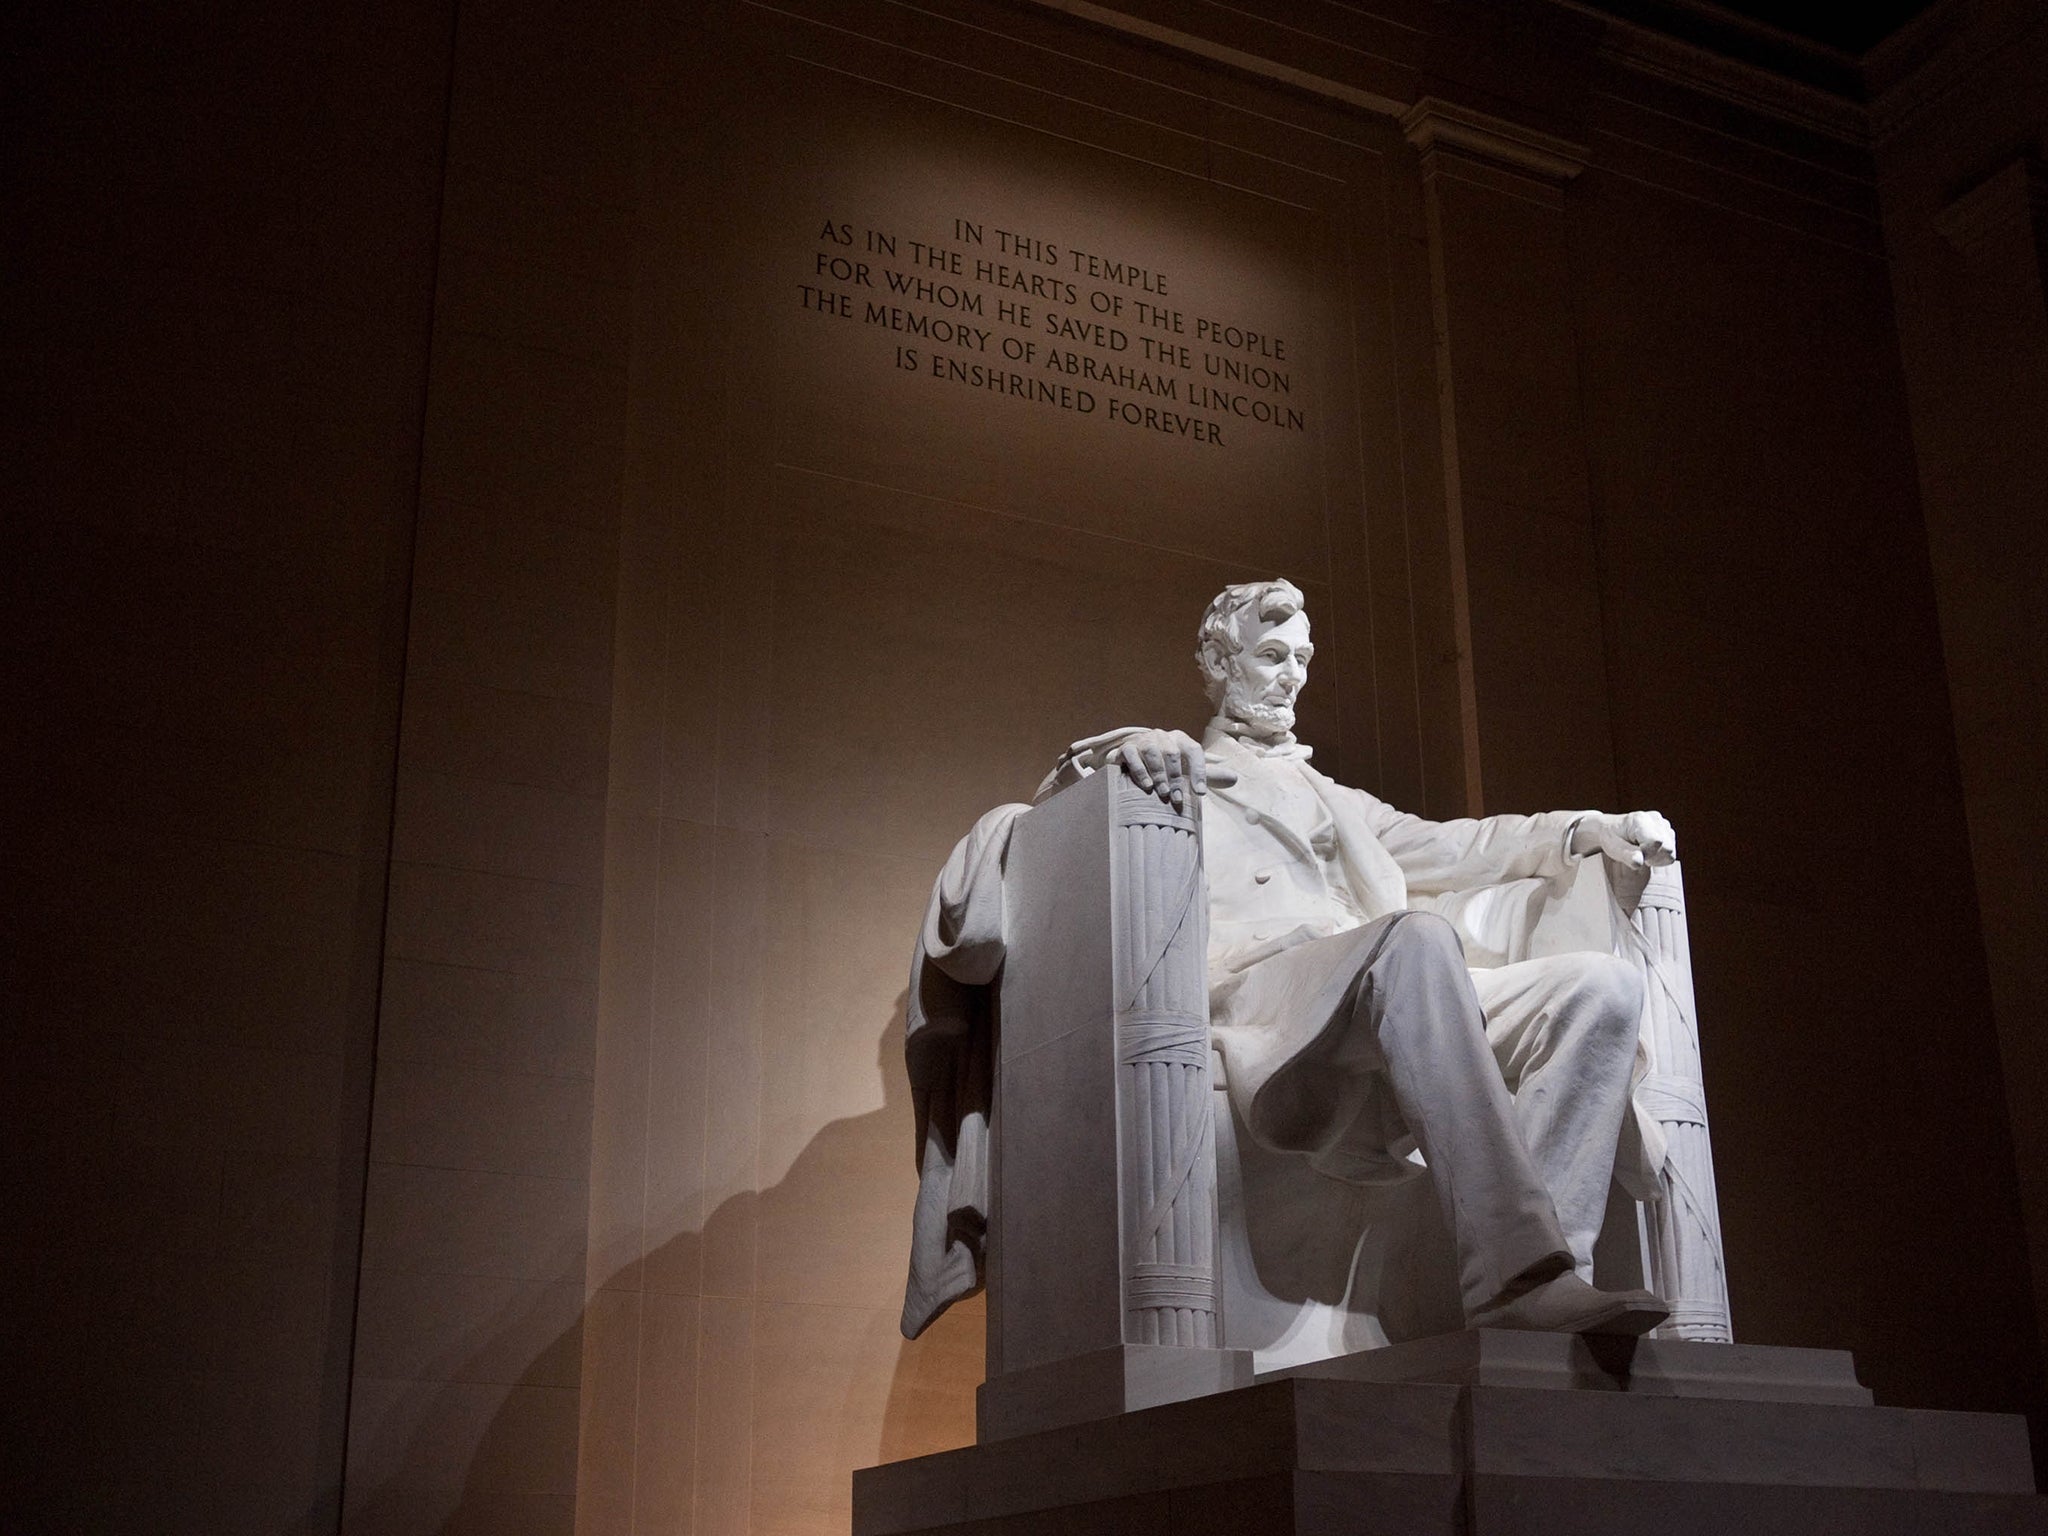 The statue of Abraham Lincoln at the Lincoln Memorial where civil rights activist Martin Luther King delivered his "I Have a Dream" speech on August 28, 1963. (MANDEL NGAN/AFP/Getty Images)